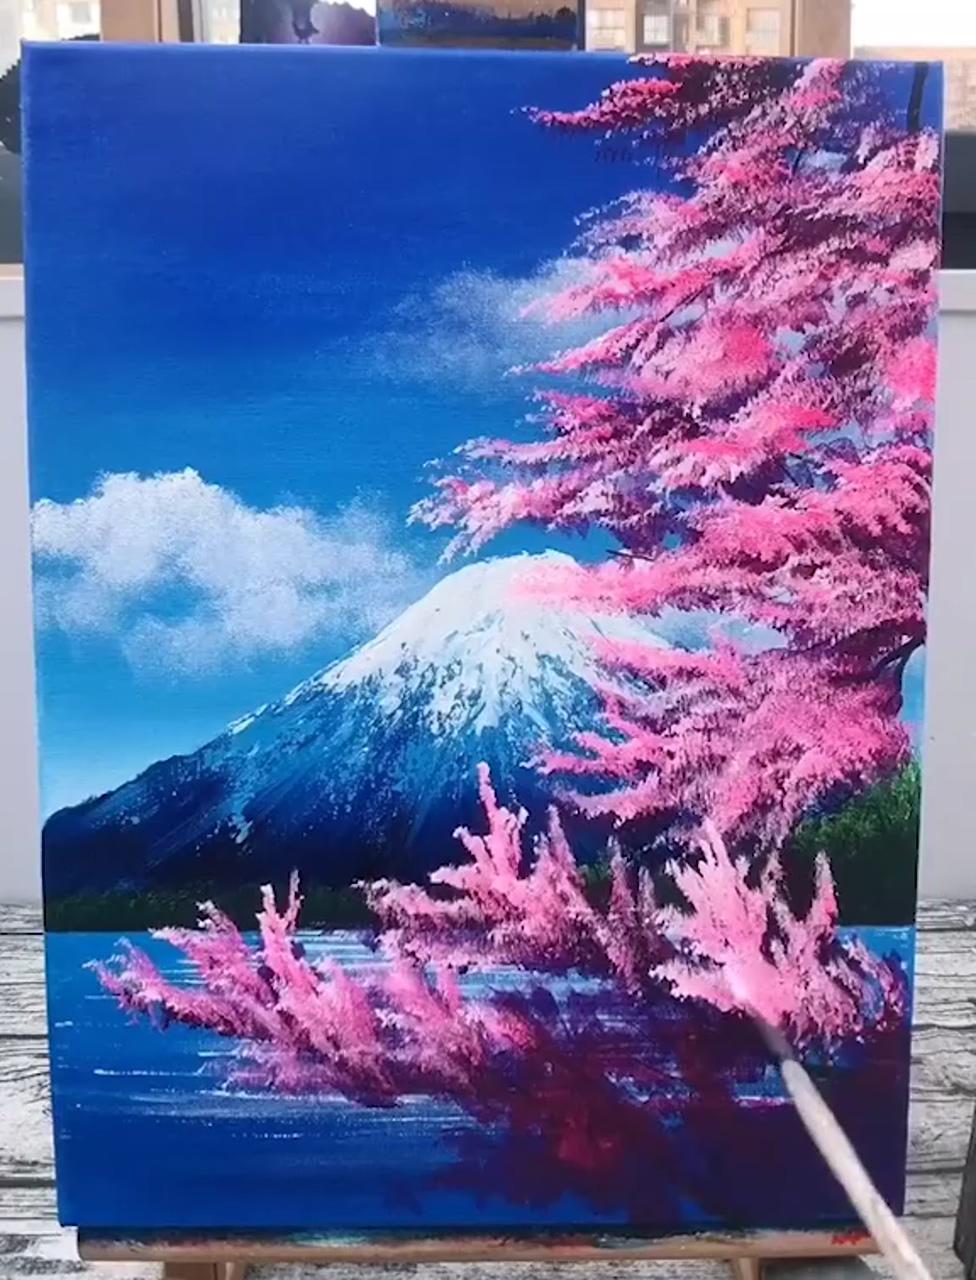 Cherry blossoms in mt fuji landscape with acrylic painting; landscape art painting